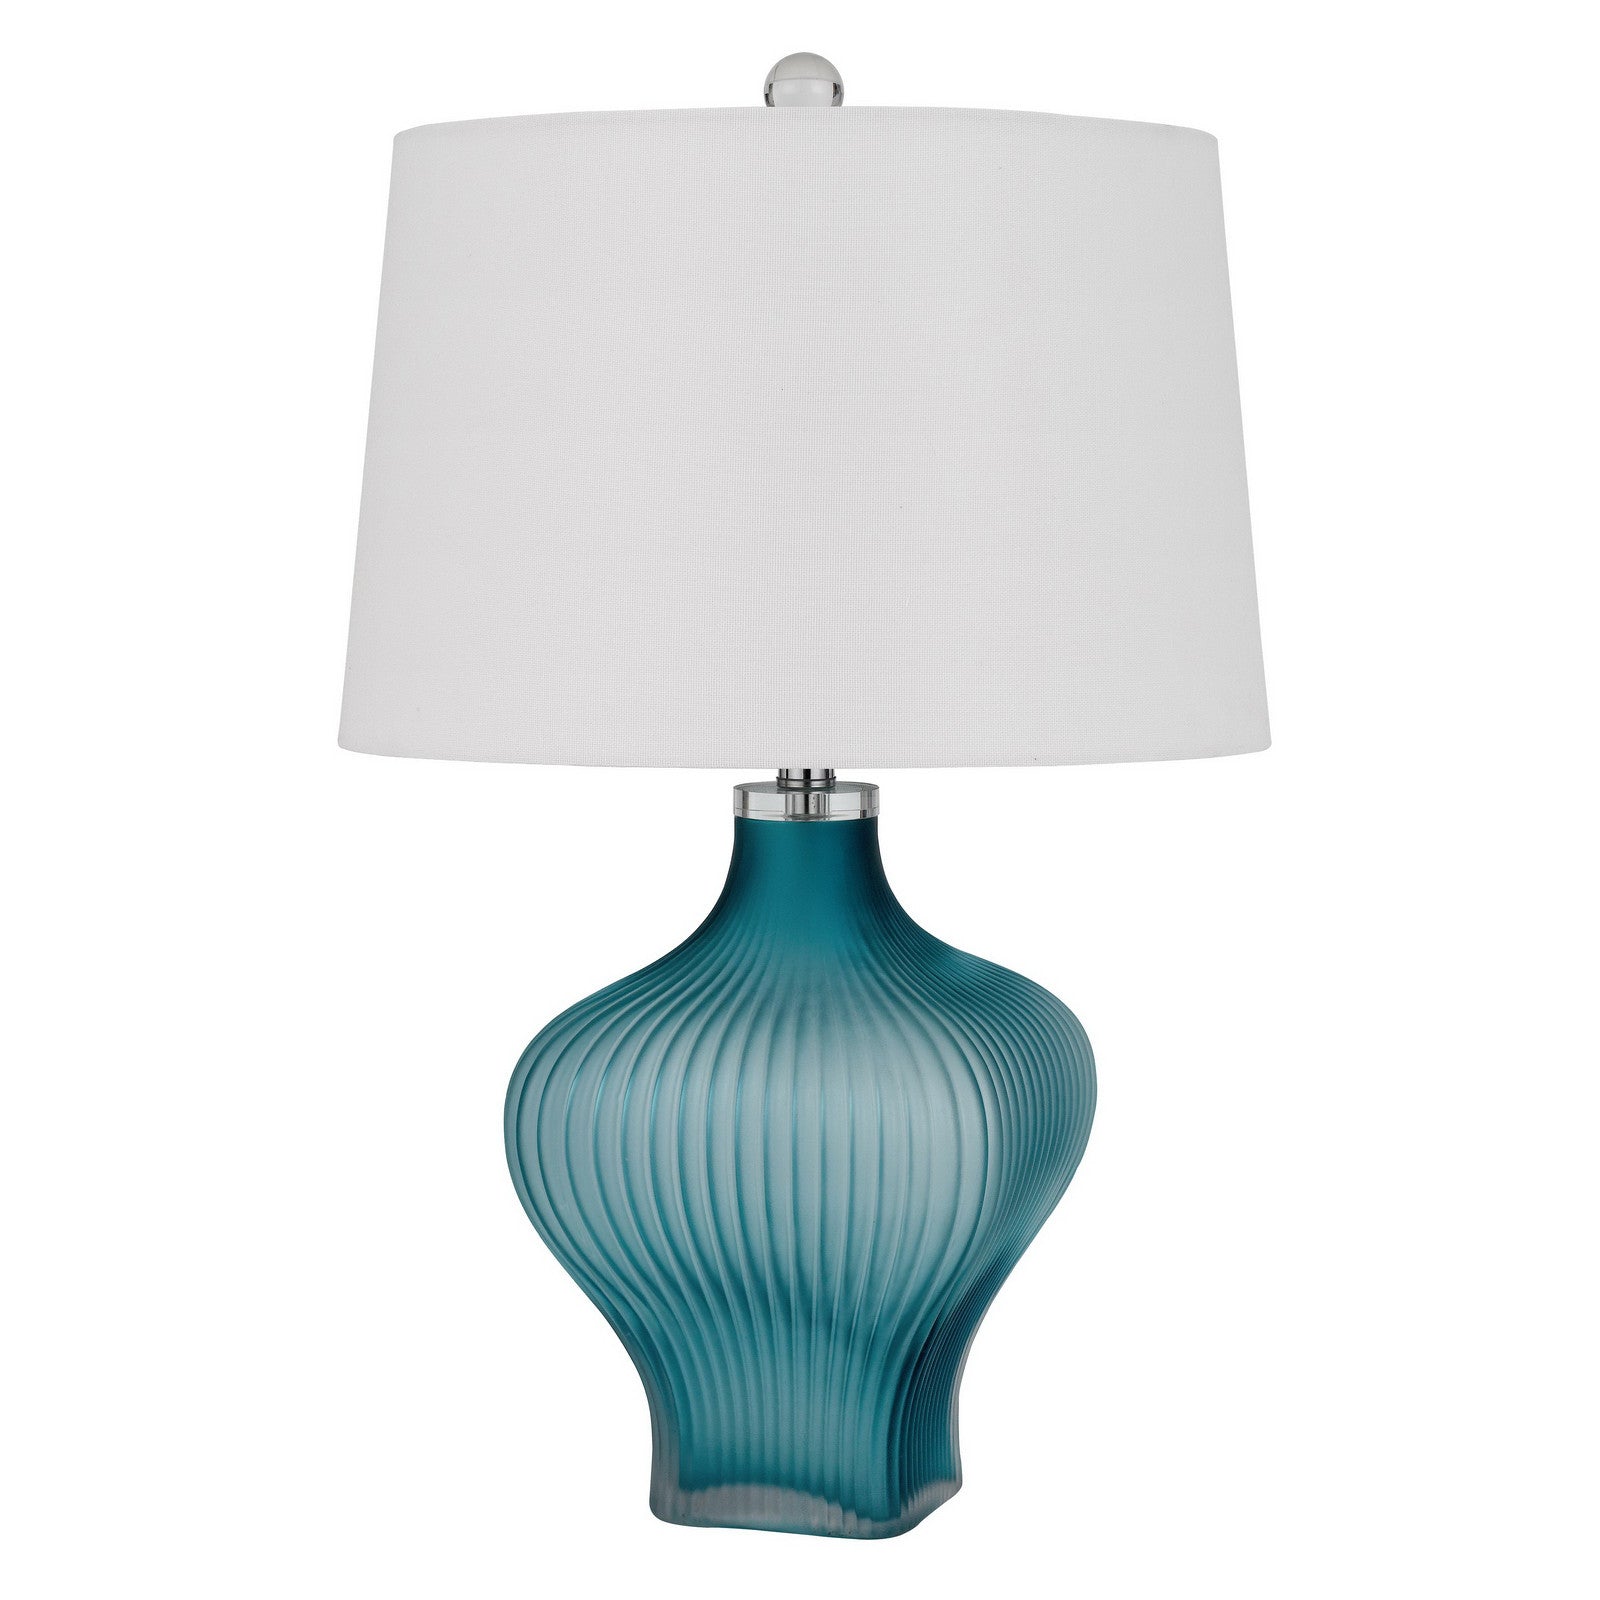 26" Aqua Glass Table Lamp With White Empire Shade